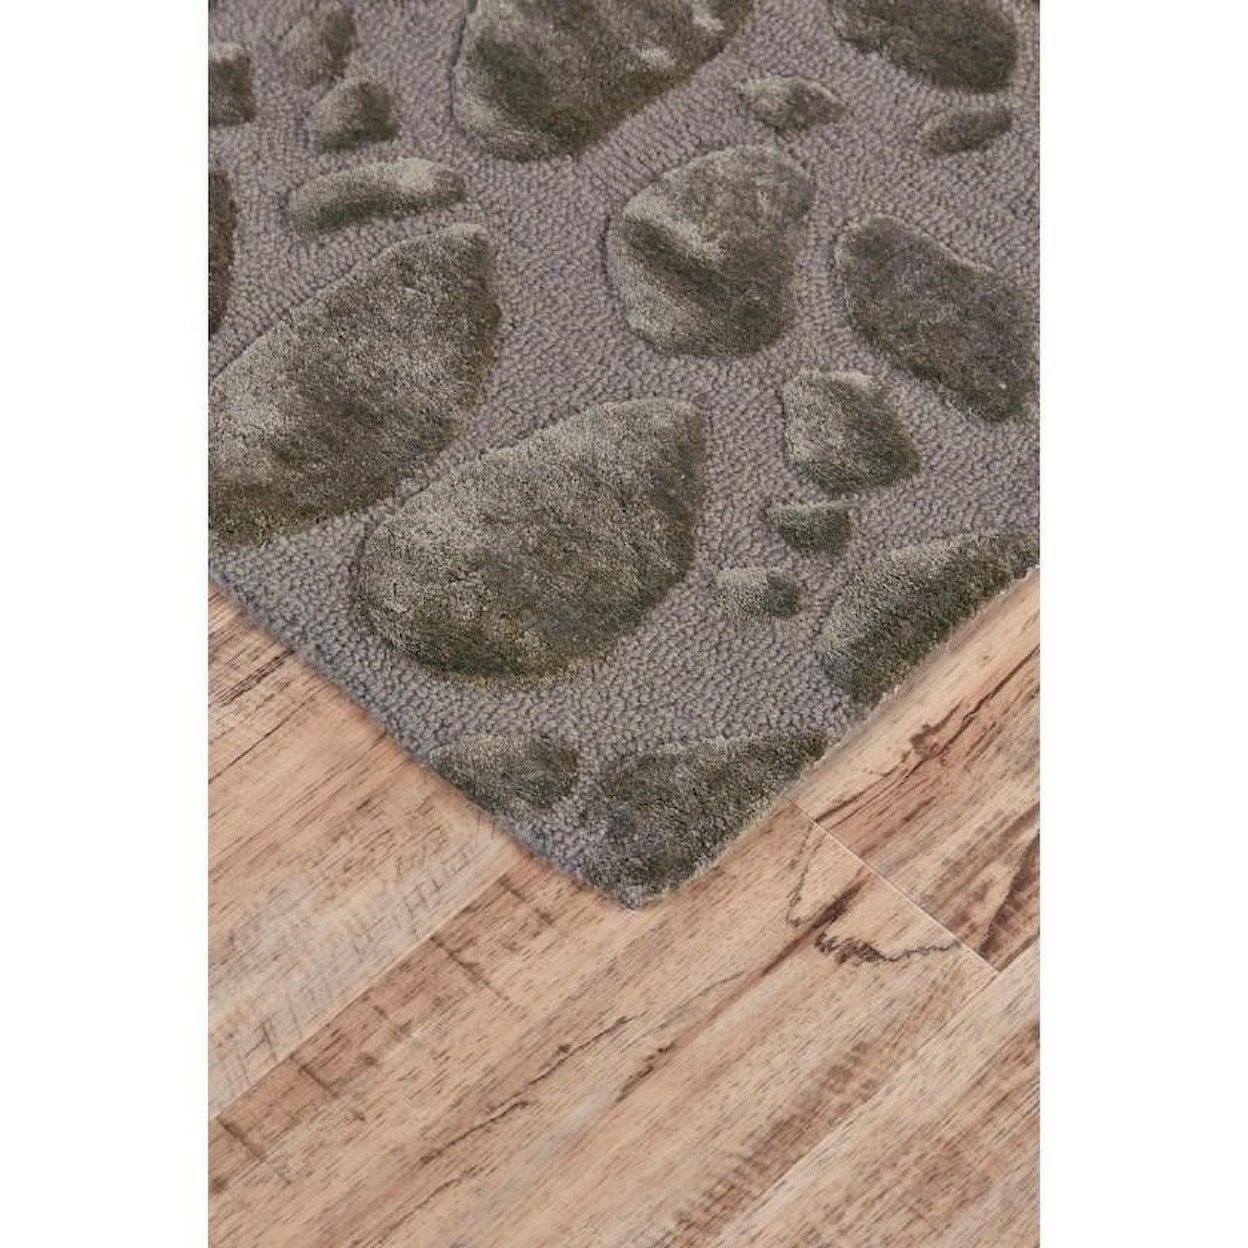 Feizy Rugs Mali Pewter 9'-6" x 13'-6" Area Rug